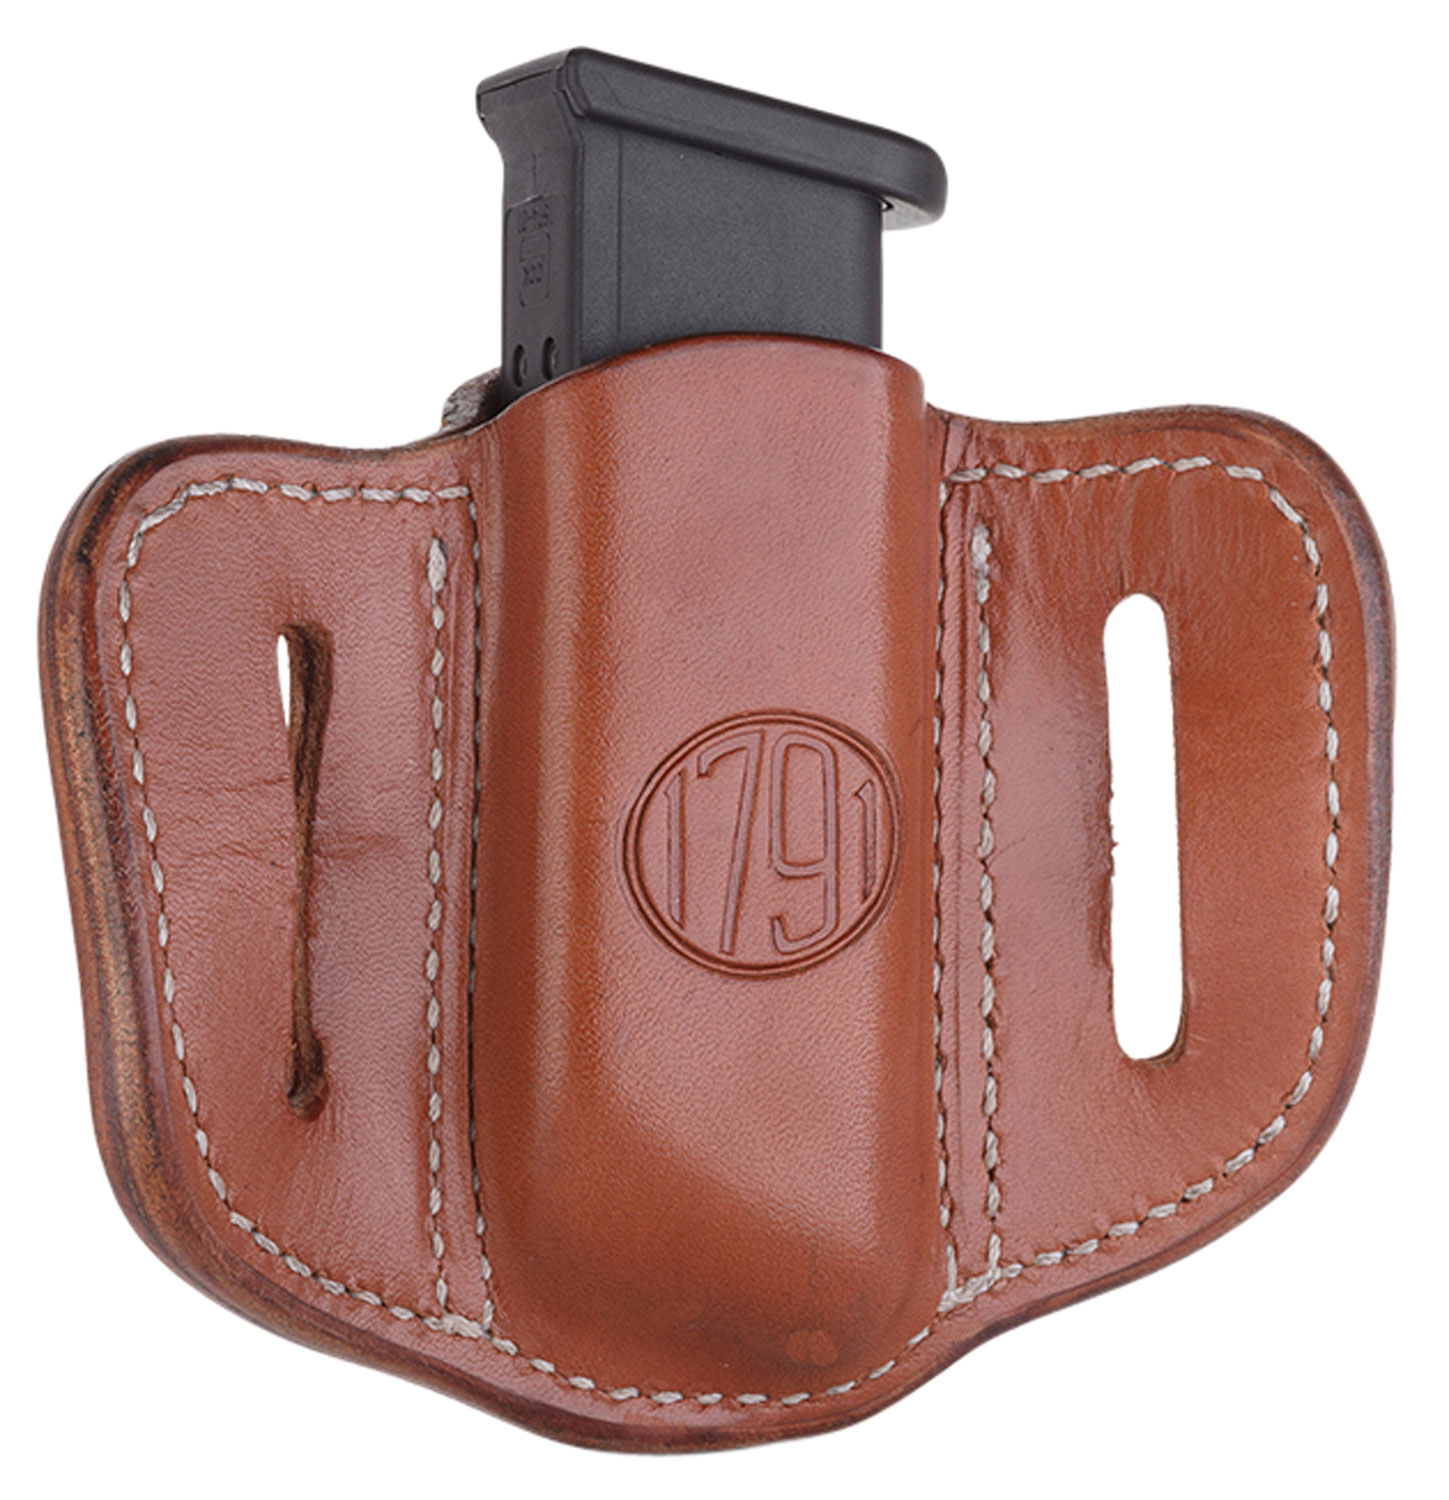 1791 Gunleather MAG12CBRA MAG1.2 Single Mag Holster Classic Brown Leather Belt Slide Compatible w/ Double Stack Ambidextrous Hand